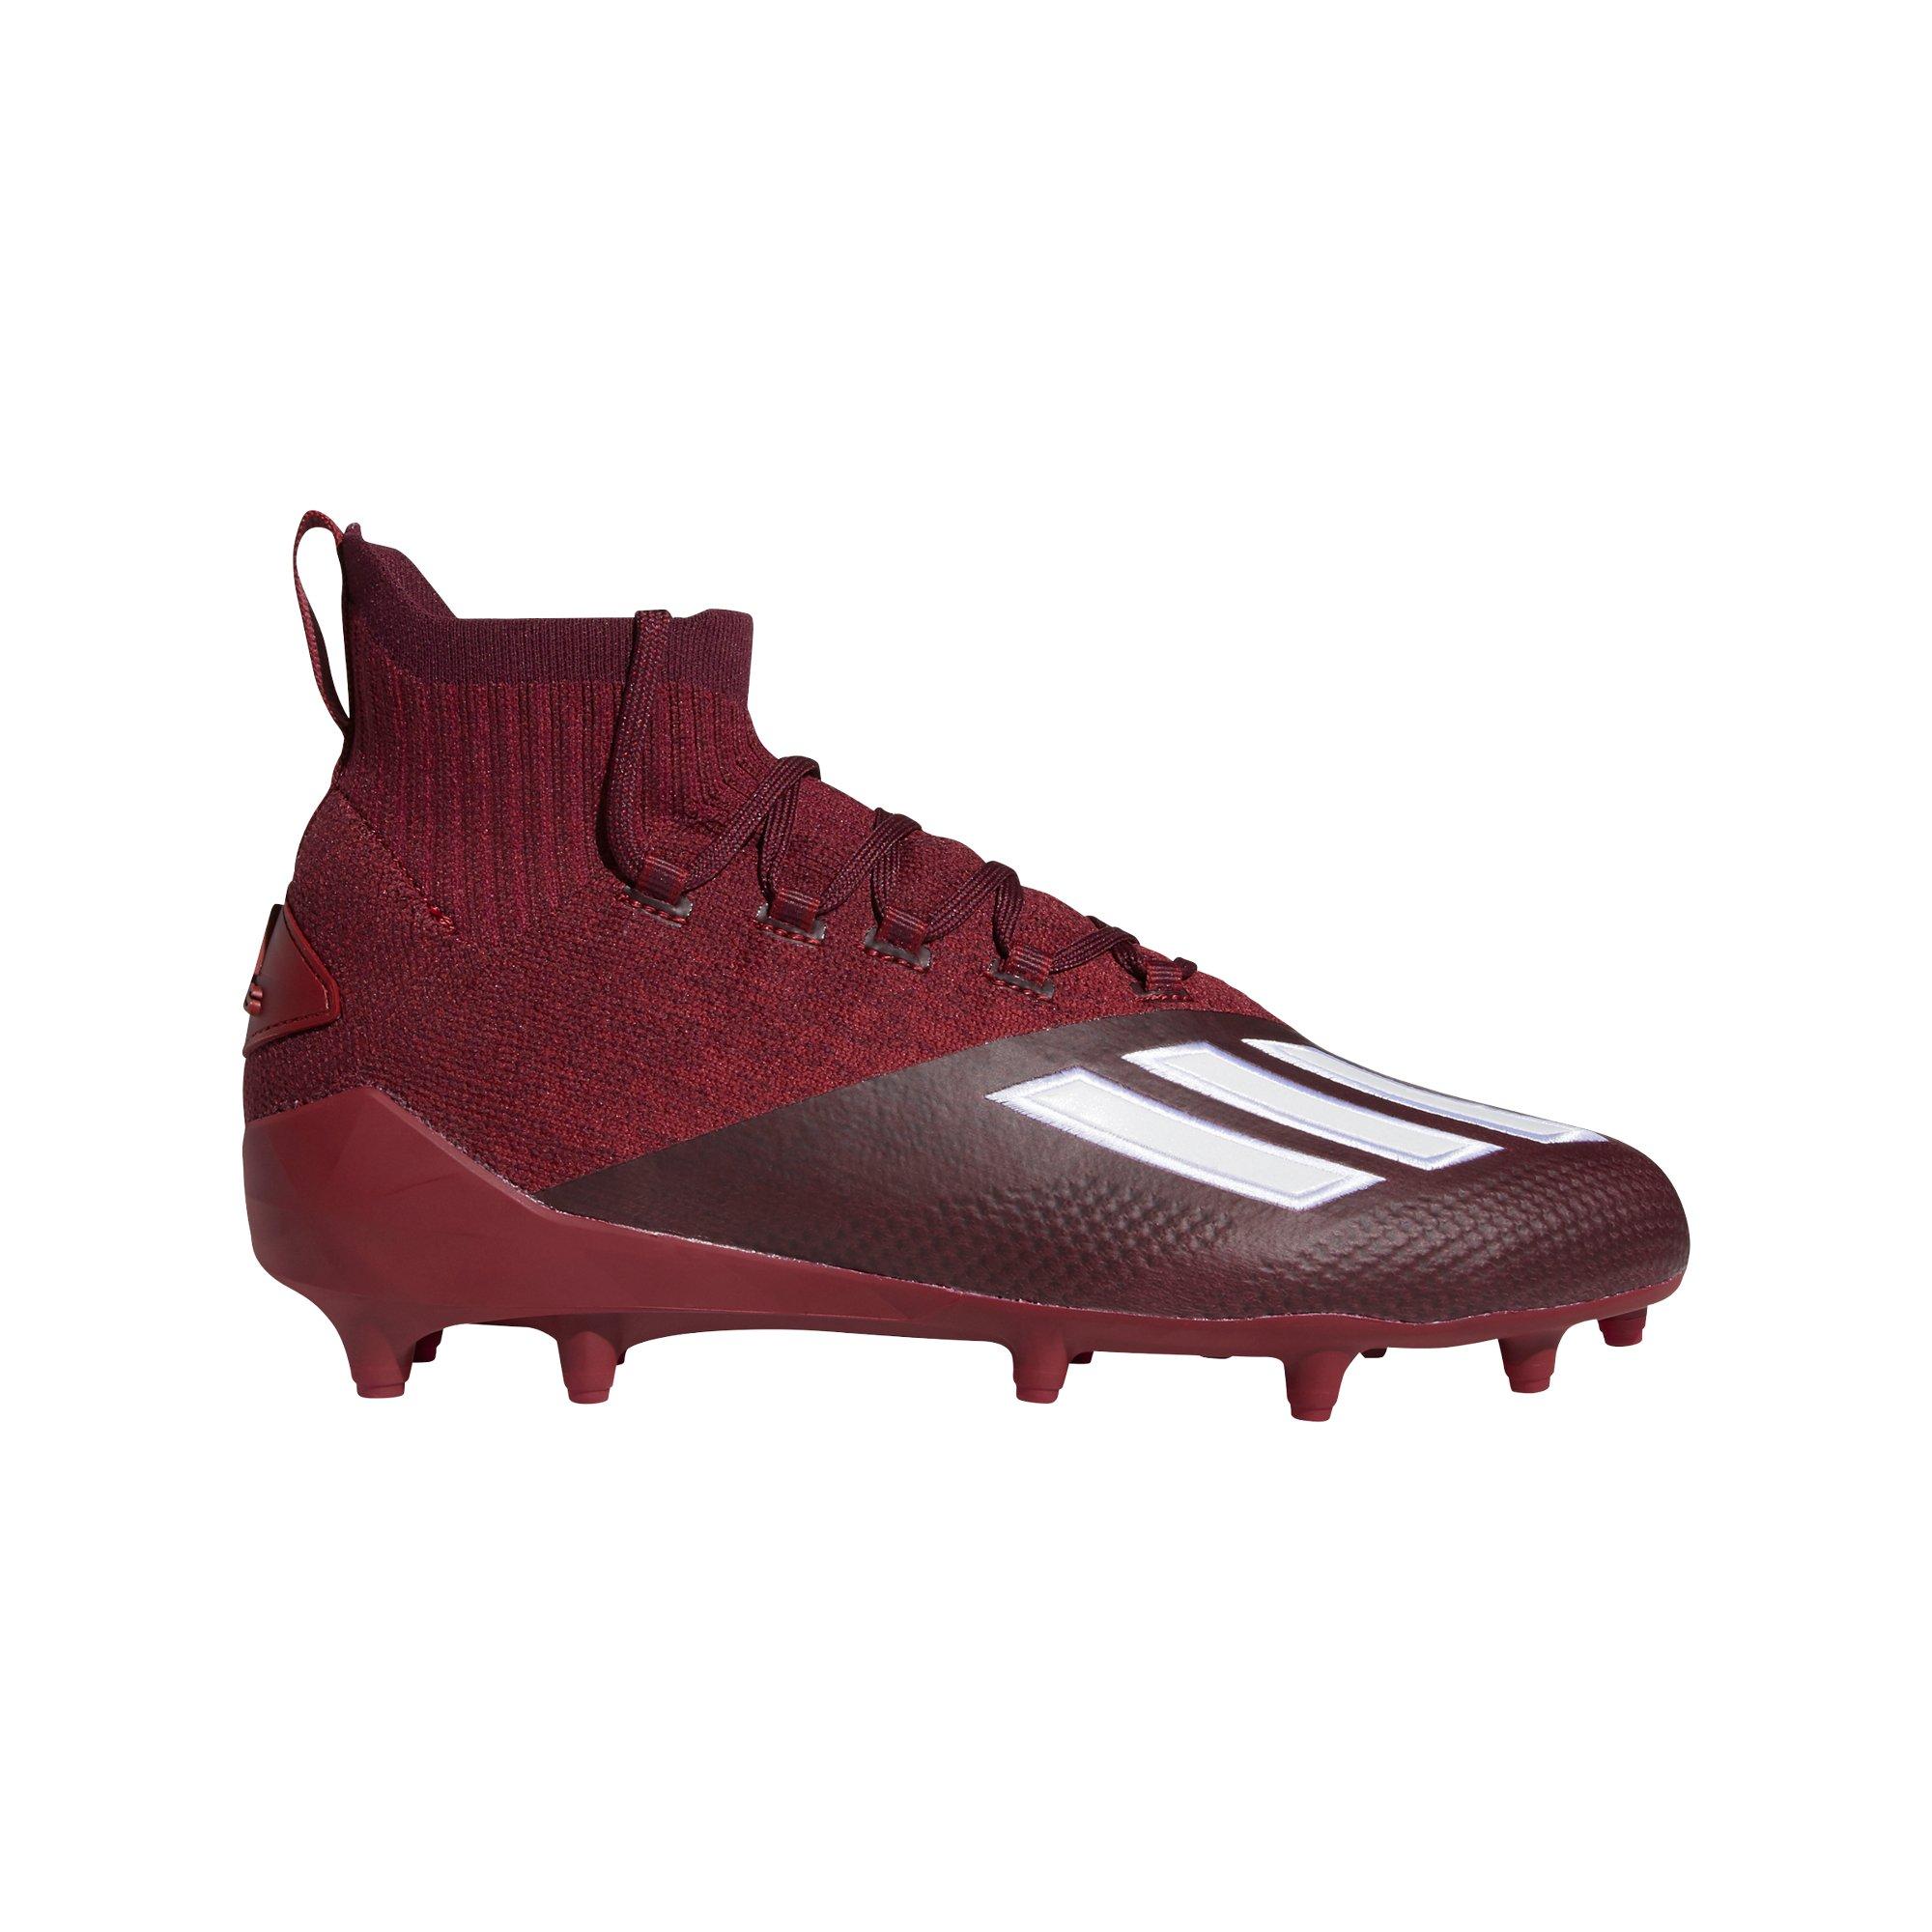 adidas football cleats maroon and white